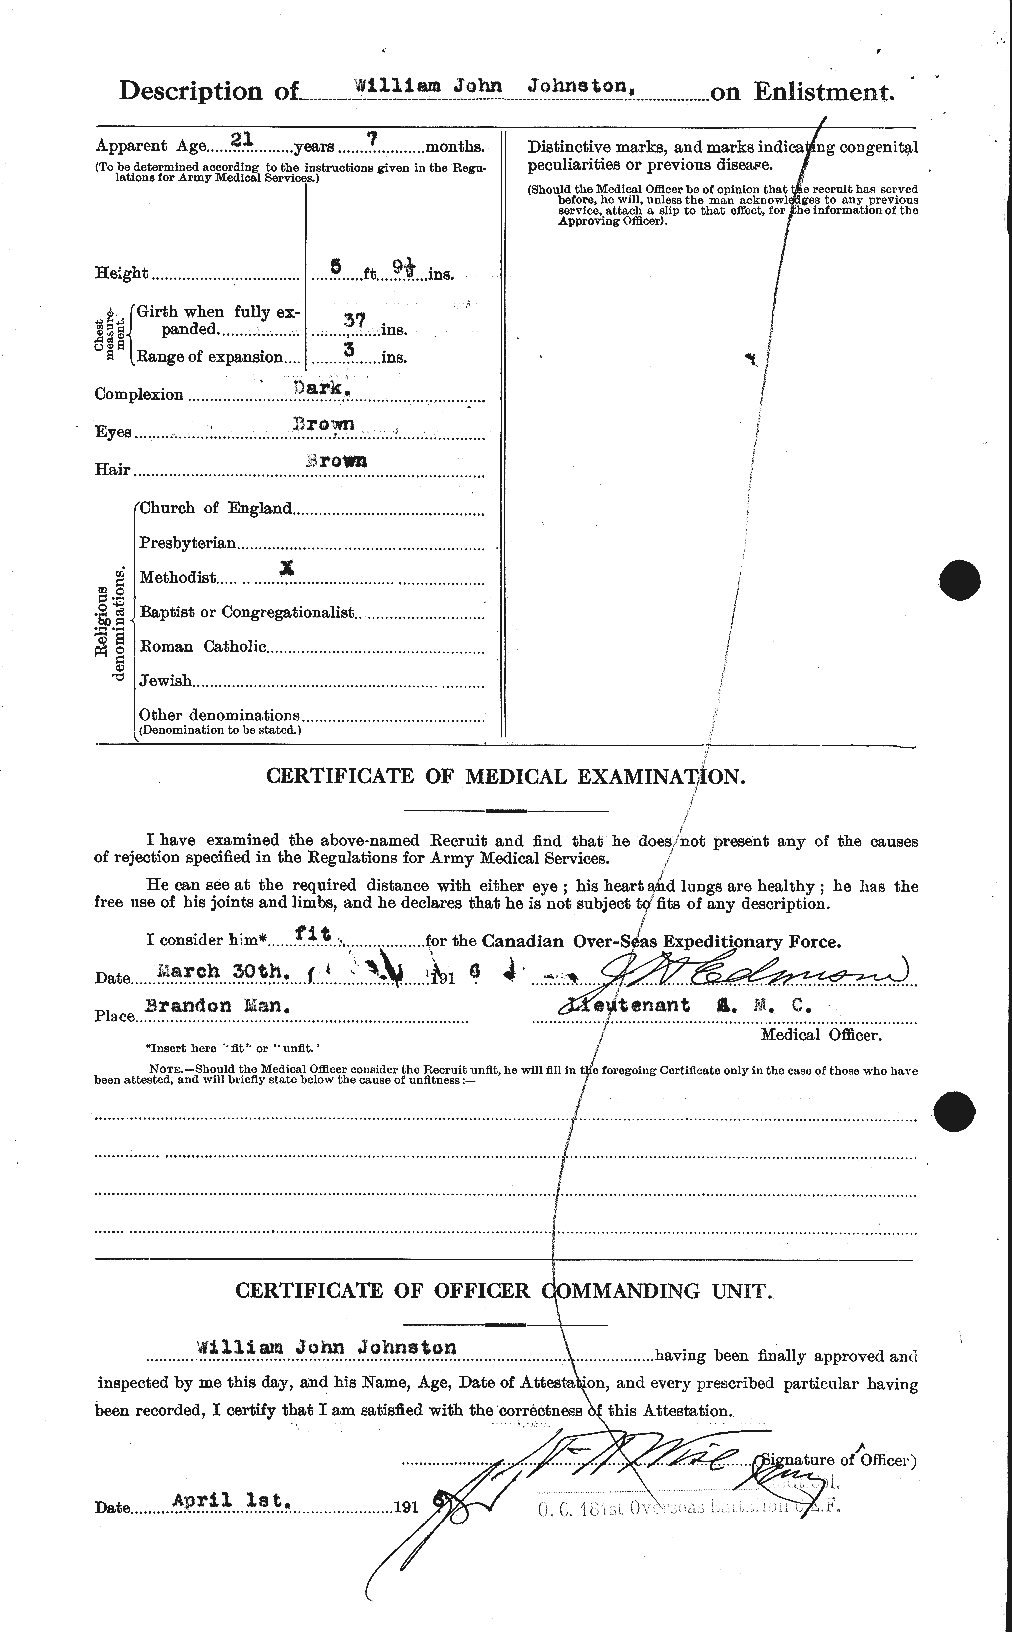 Personnel Records of the First World War - CEF 429590b